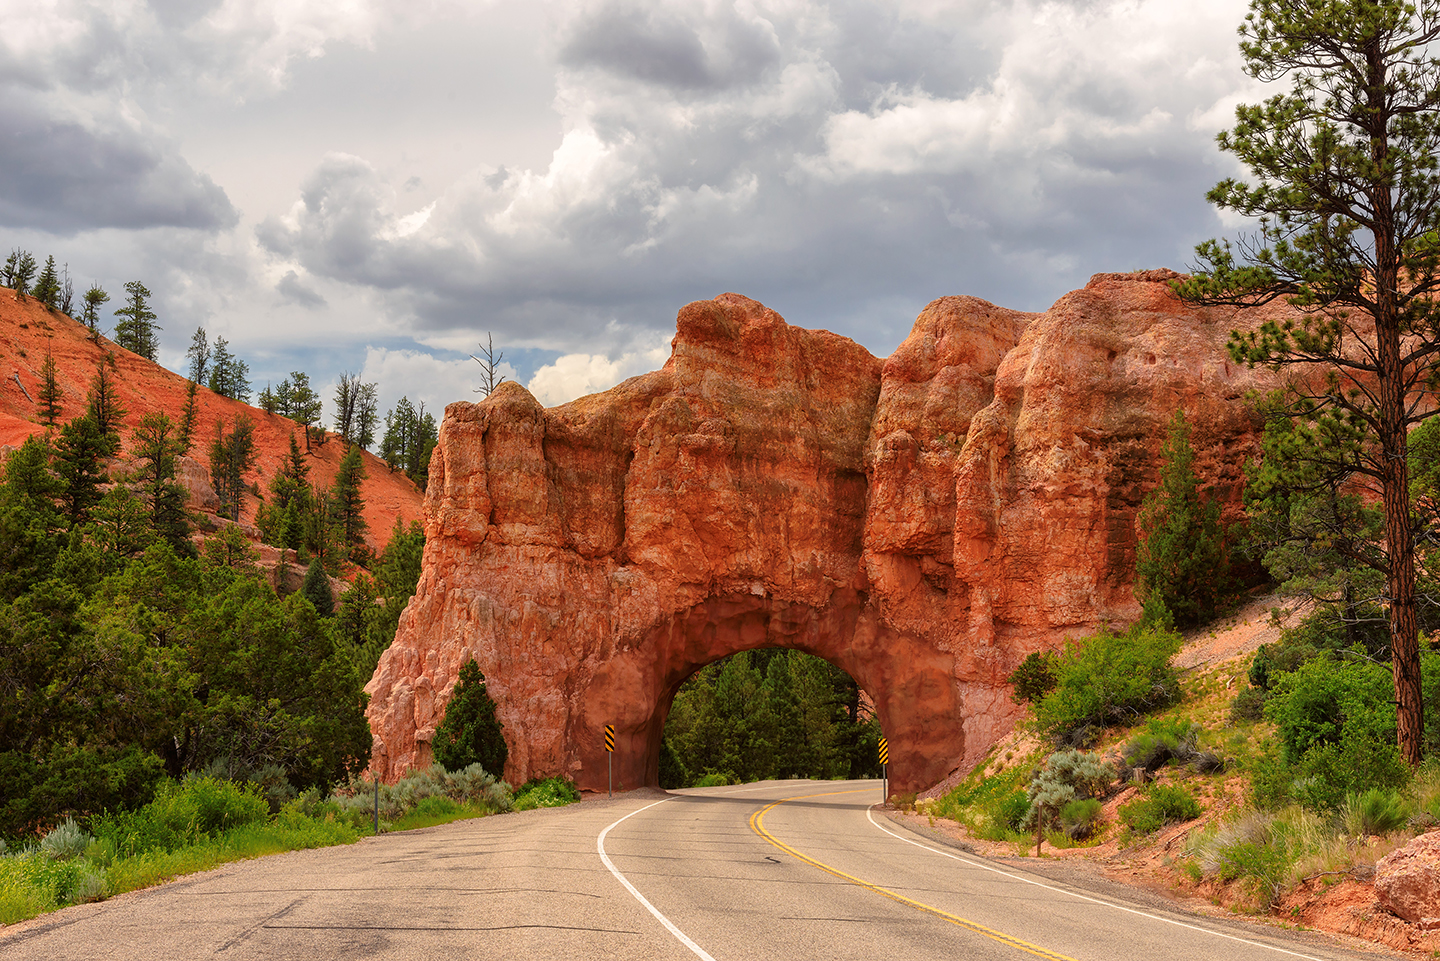 A rock arch over a two-lane highway.